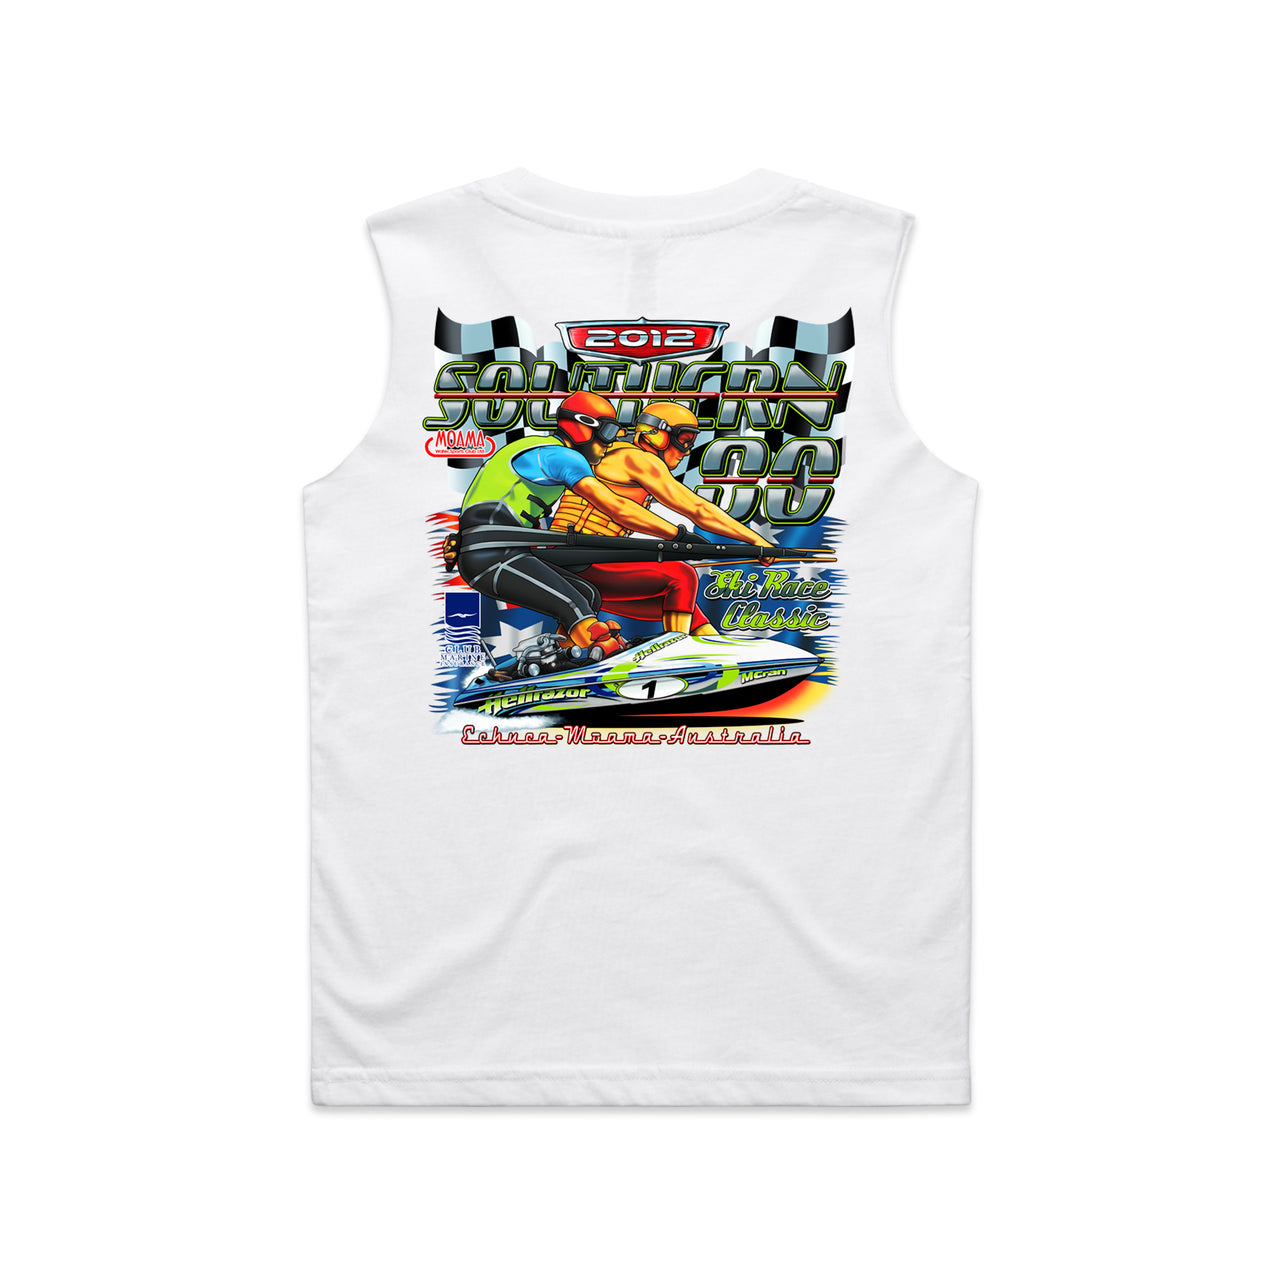 S80 2012 Hellrazor Event Youth/Kids Tank